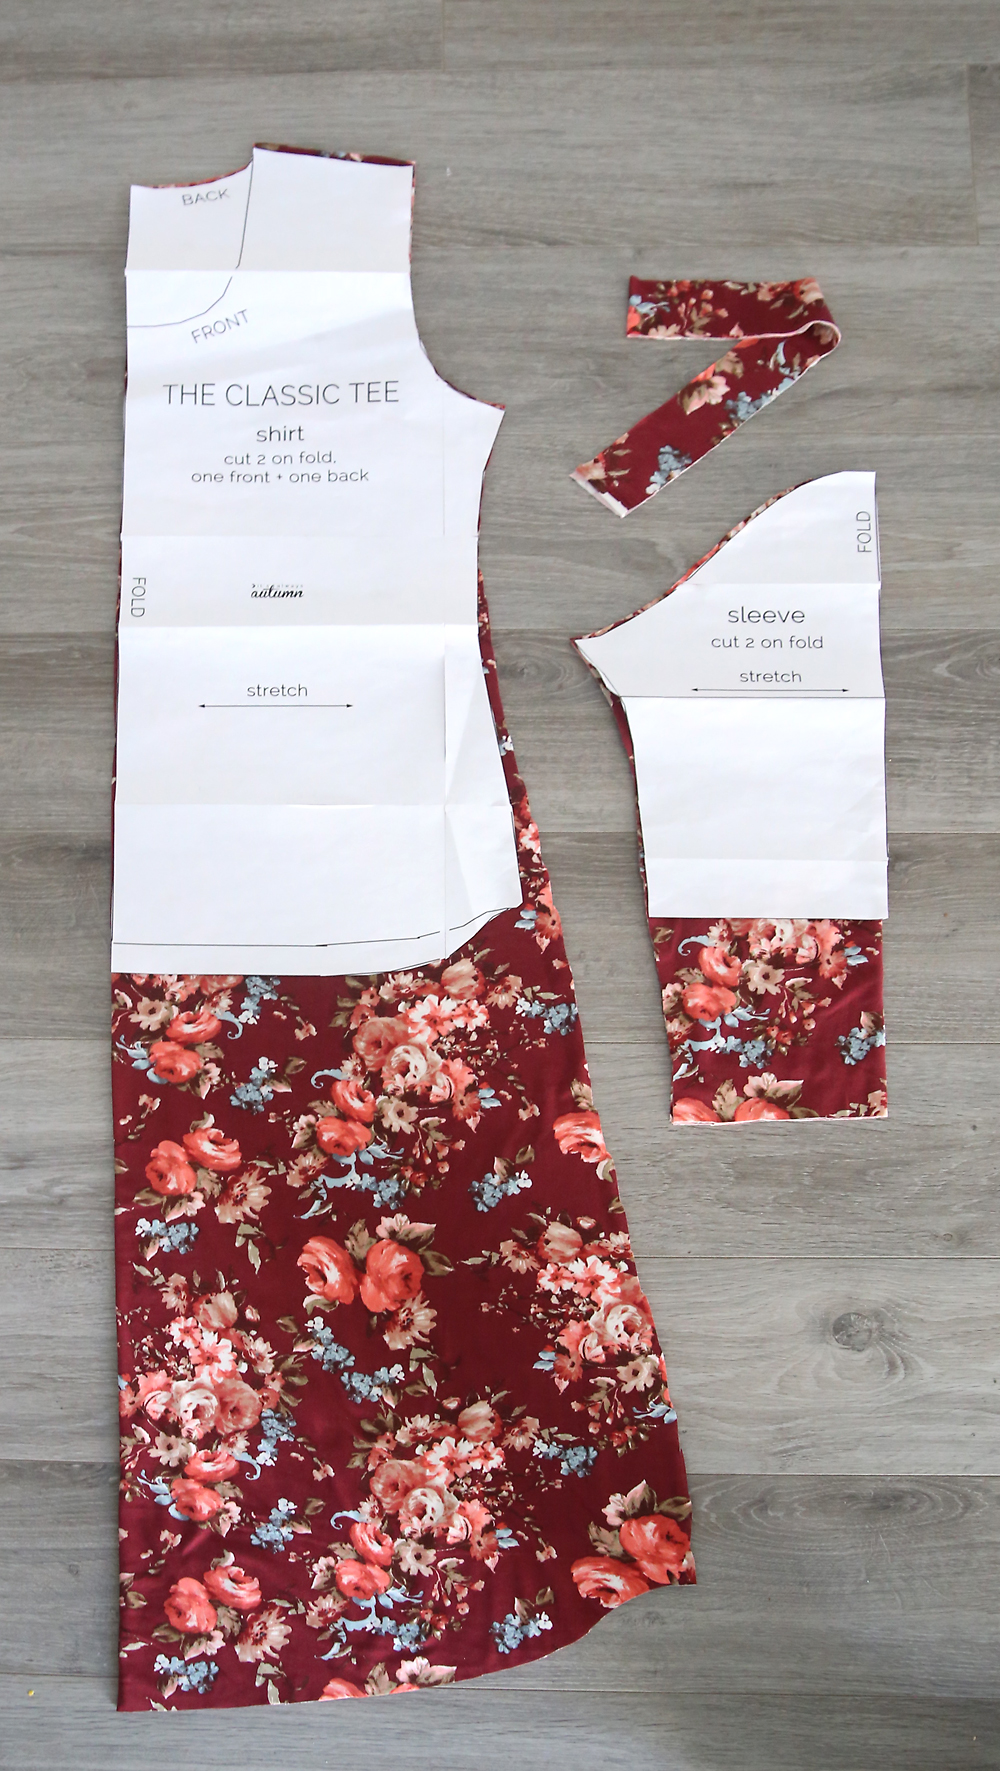 Fabric pieces for a dress cut from the Classic Tee sewing pattern